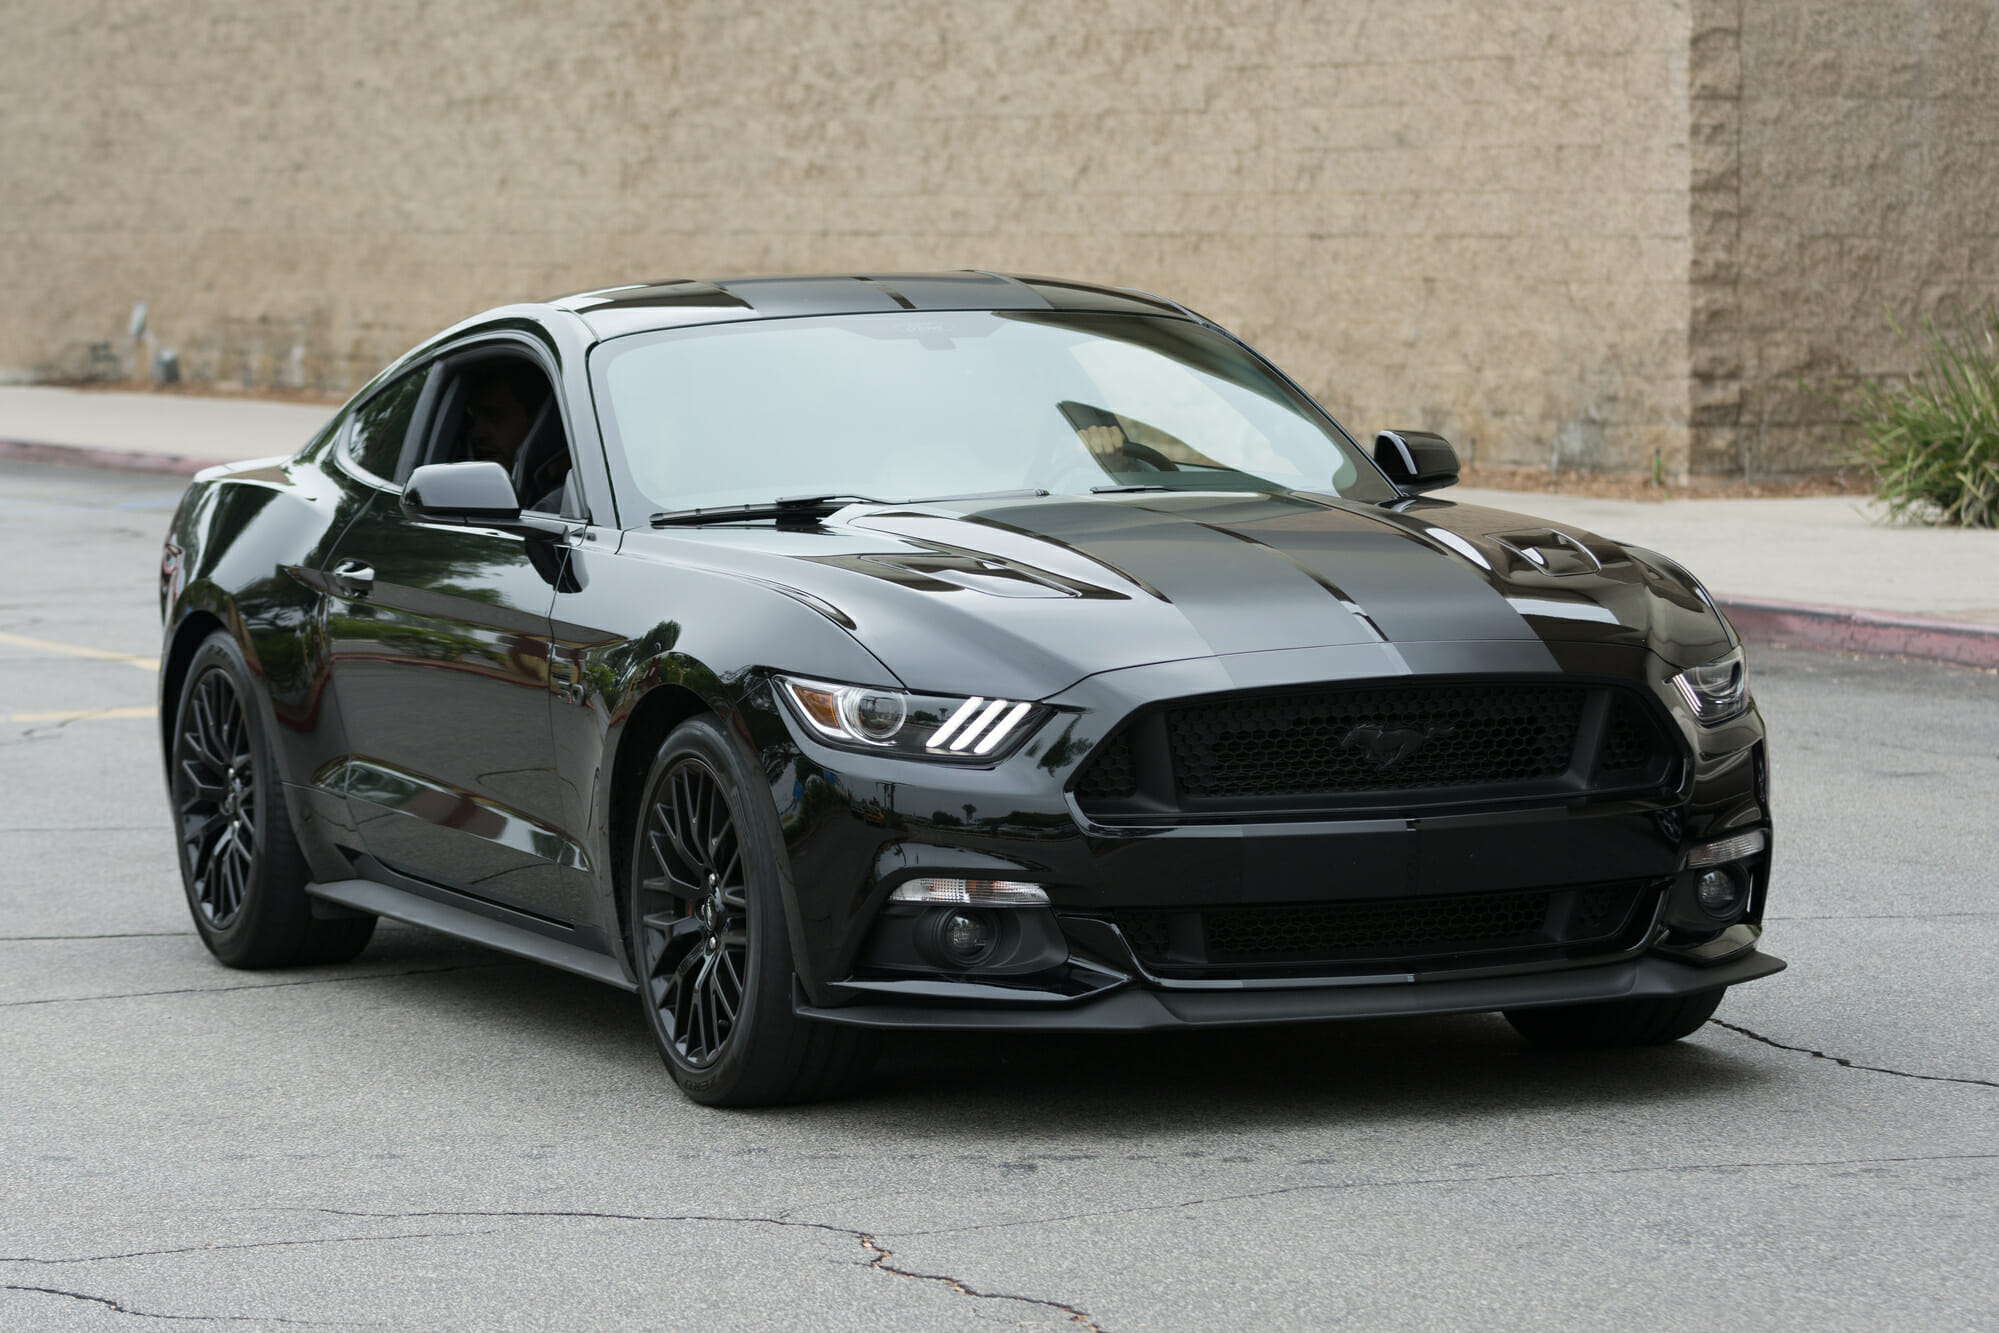 Black Ford Mustang GT with 5.0 V8 on city street